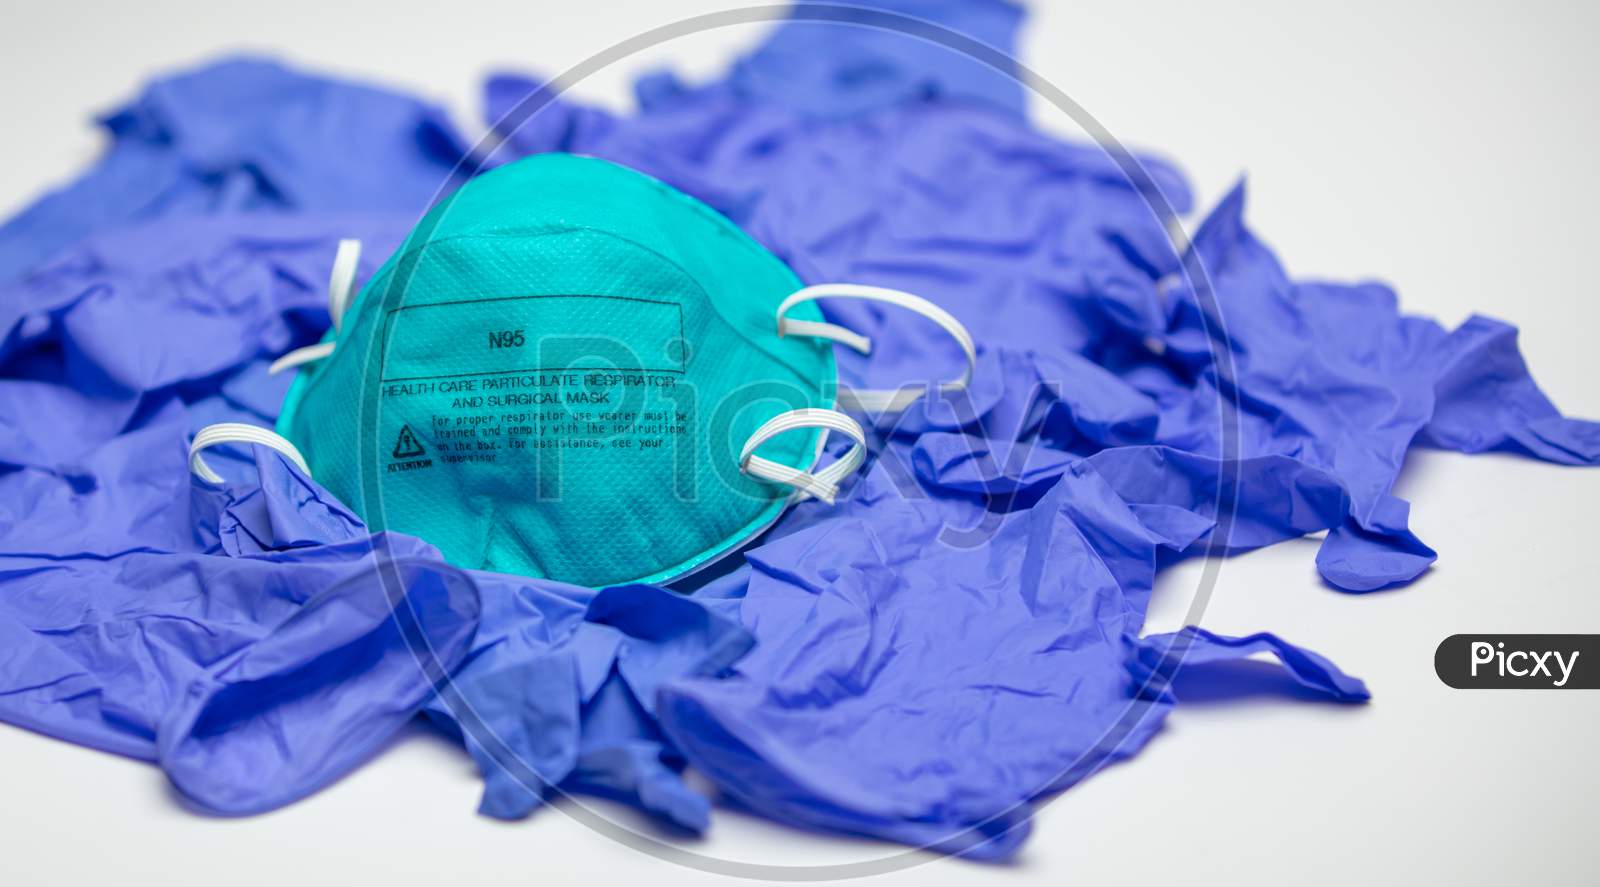 A Turquoise N95 Particulate Respirator And Surgical Mask On Top Of Many Medical Gloves.